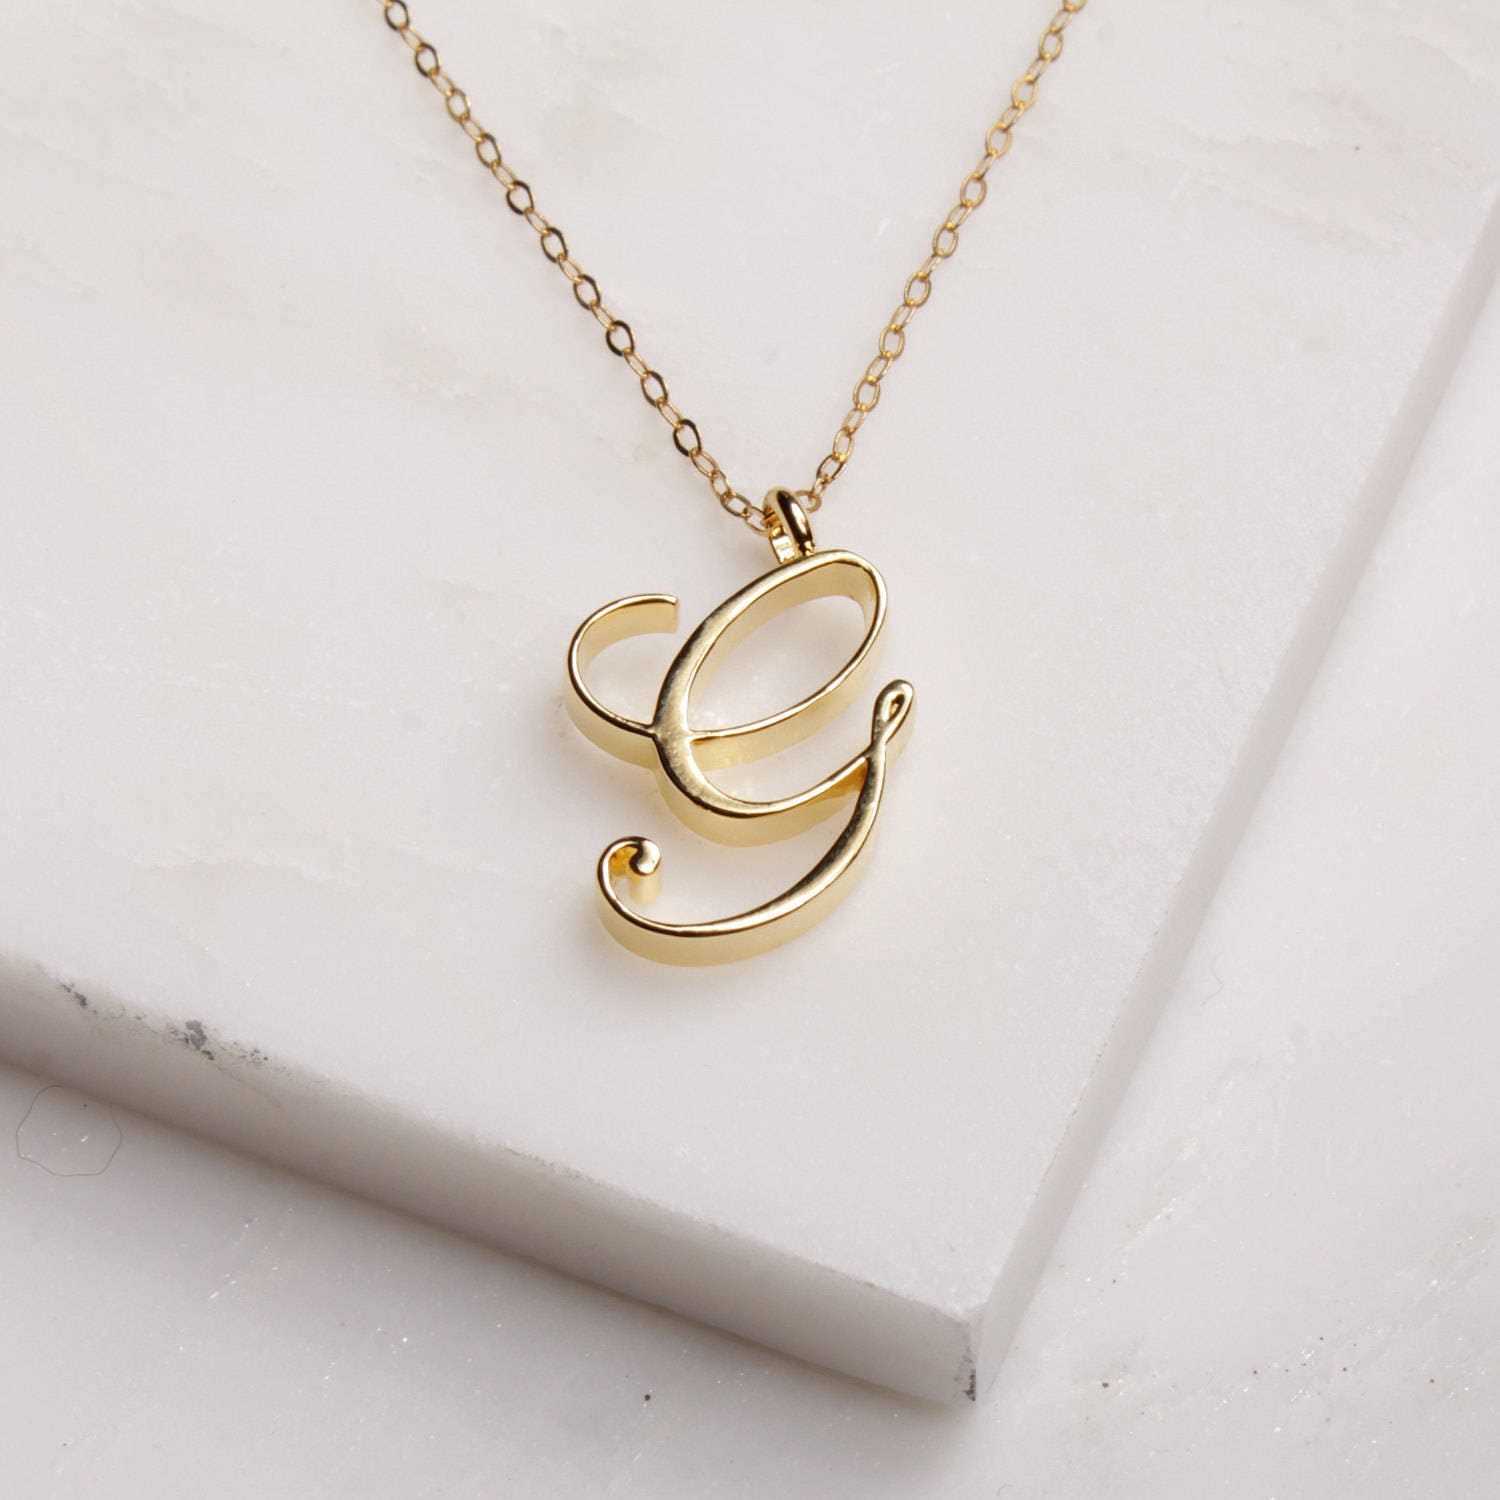 14K Gold Circle Initial Charm Necklace - 4-$59.00 / 20 inchs